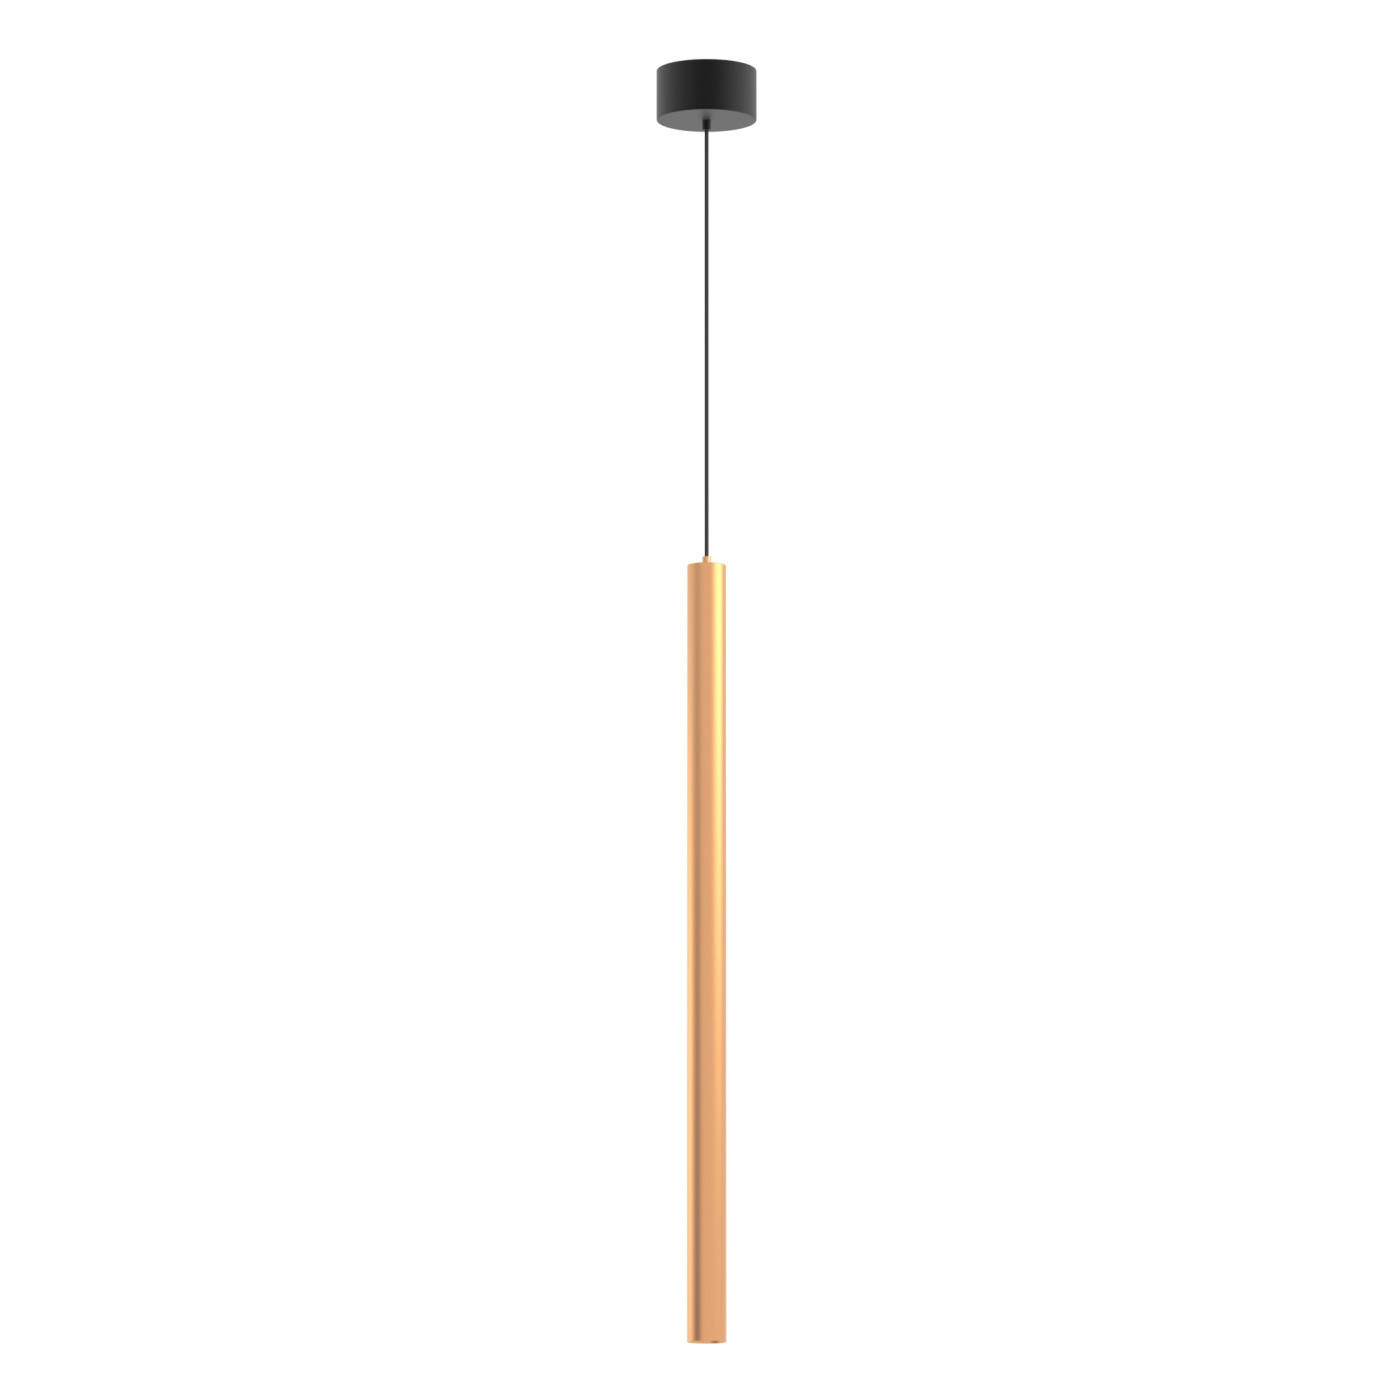 Светильник SP-PIPE-HANG-L600-R30-9W Day4000 (GD, 24 deg, 230V) (Arlight, IP20 Металл, 3 года) lighting diy connecting rod lamp lengthen rod pole lamp lengthen rod replacement pipe